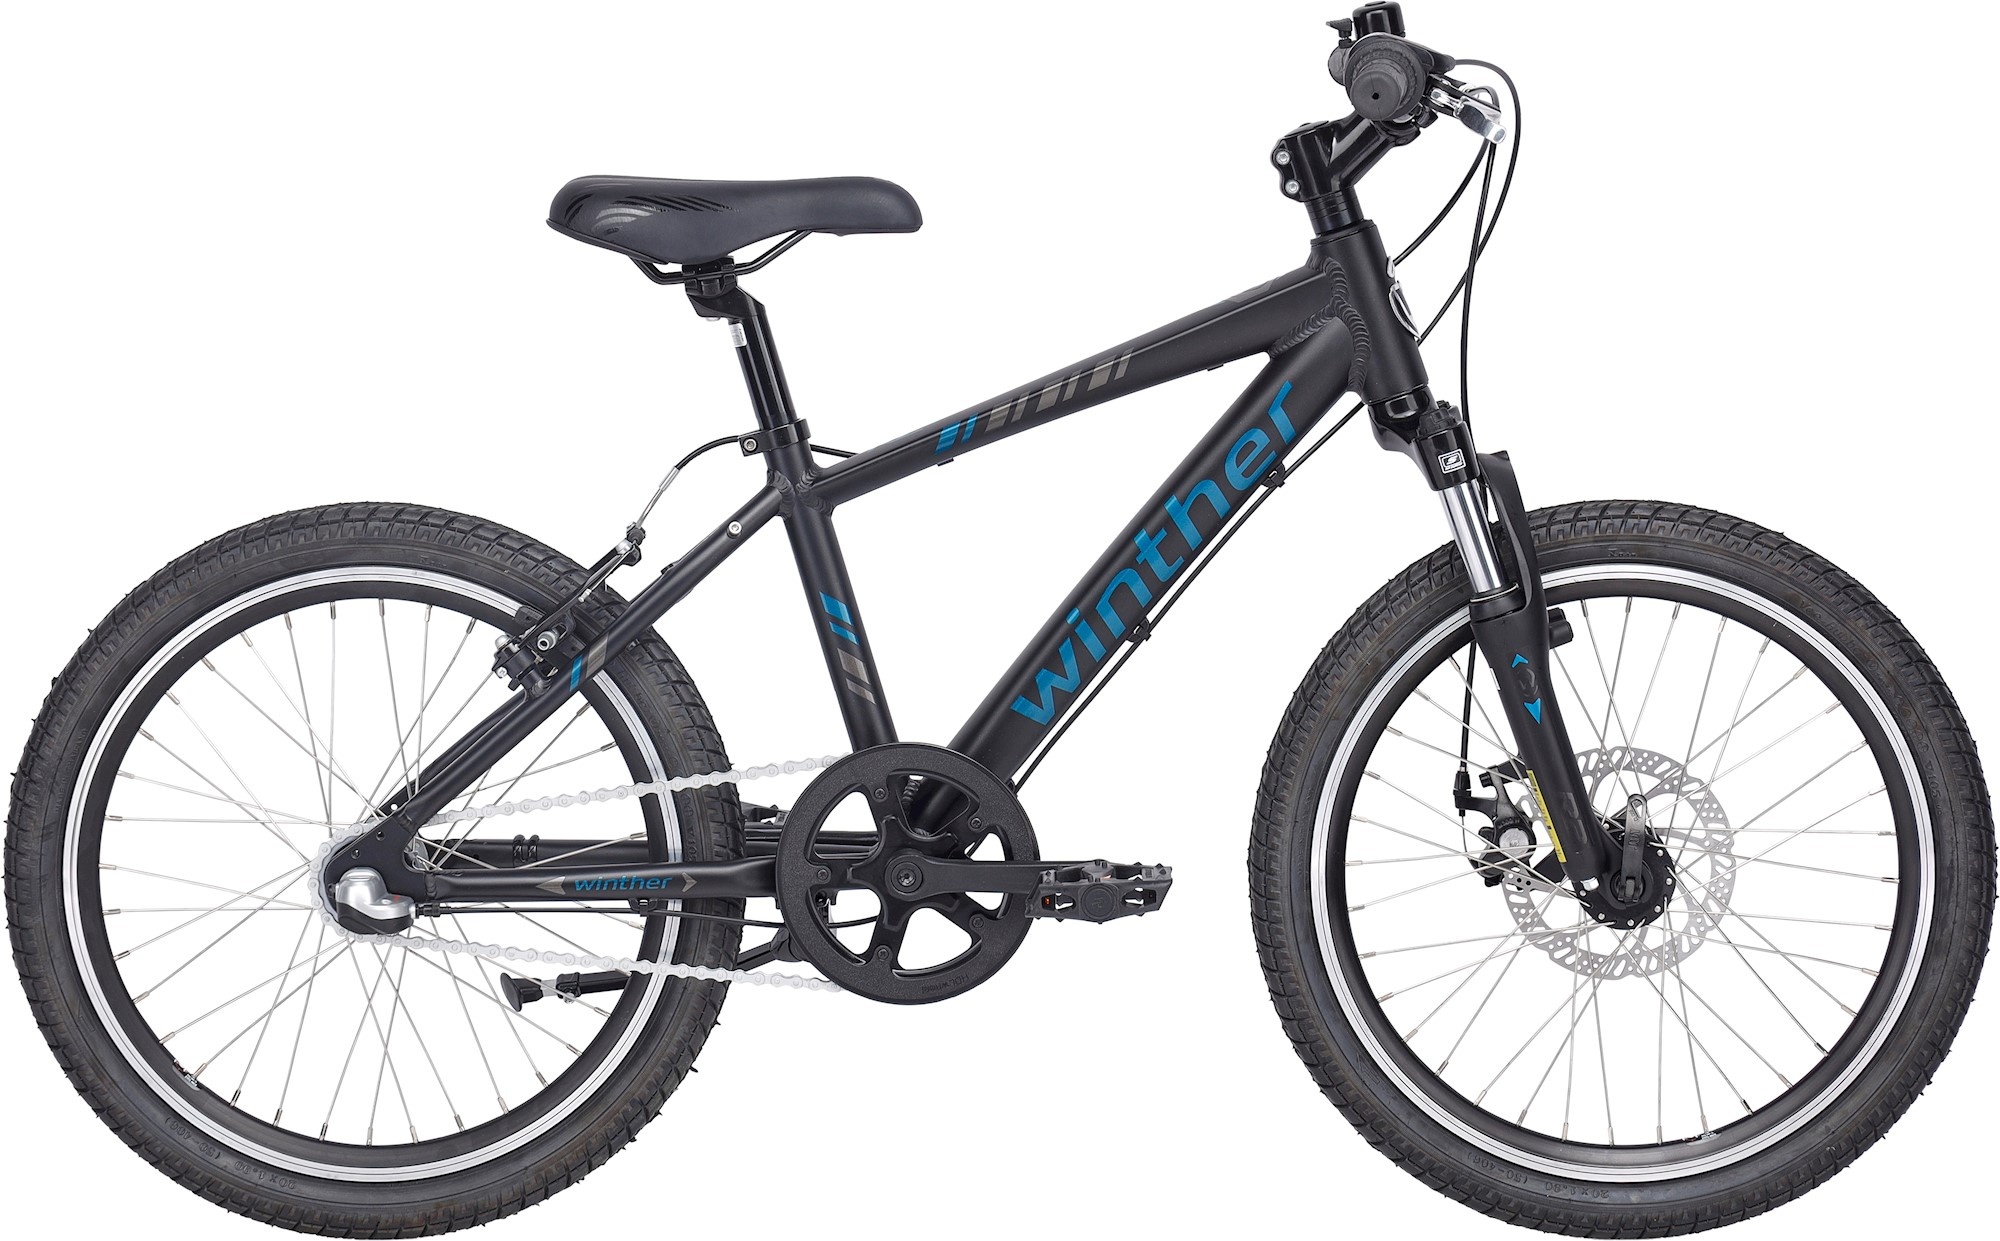 Outlet R2 sport | mountainbike